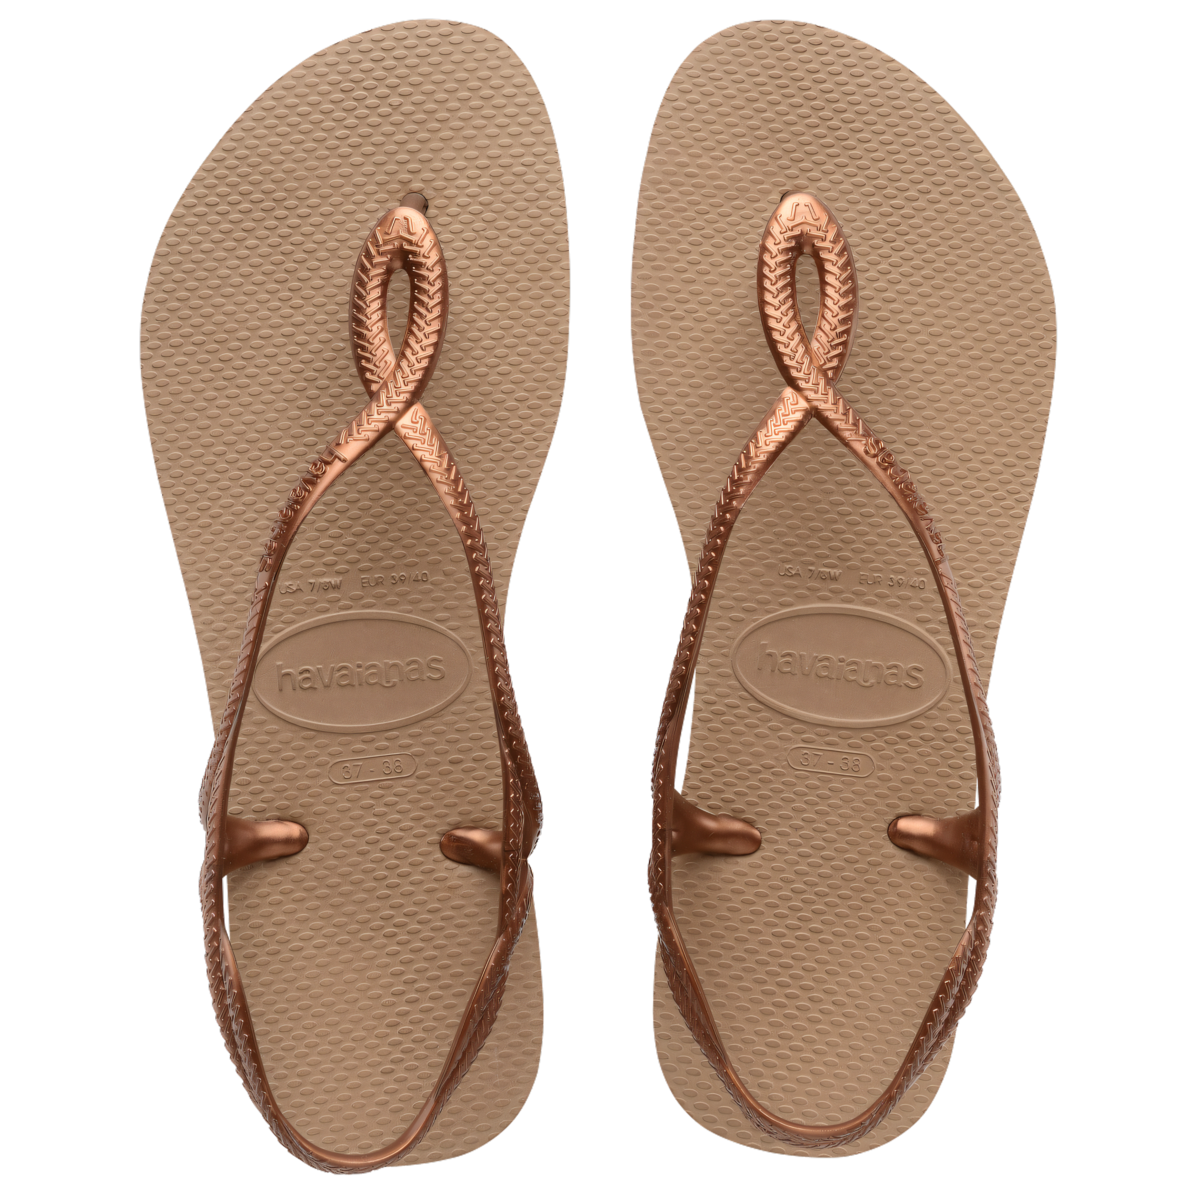 7891224099184 - CHINELO ROSE GOLD/ROSE GOLD LUNA HAVAIANAS WOMENS N° 39/40